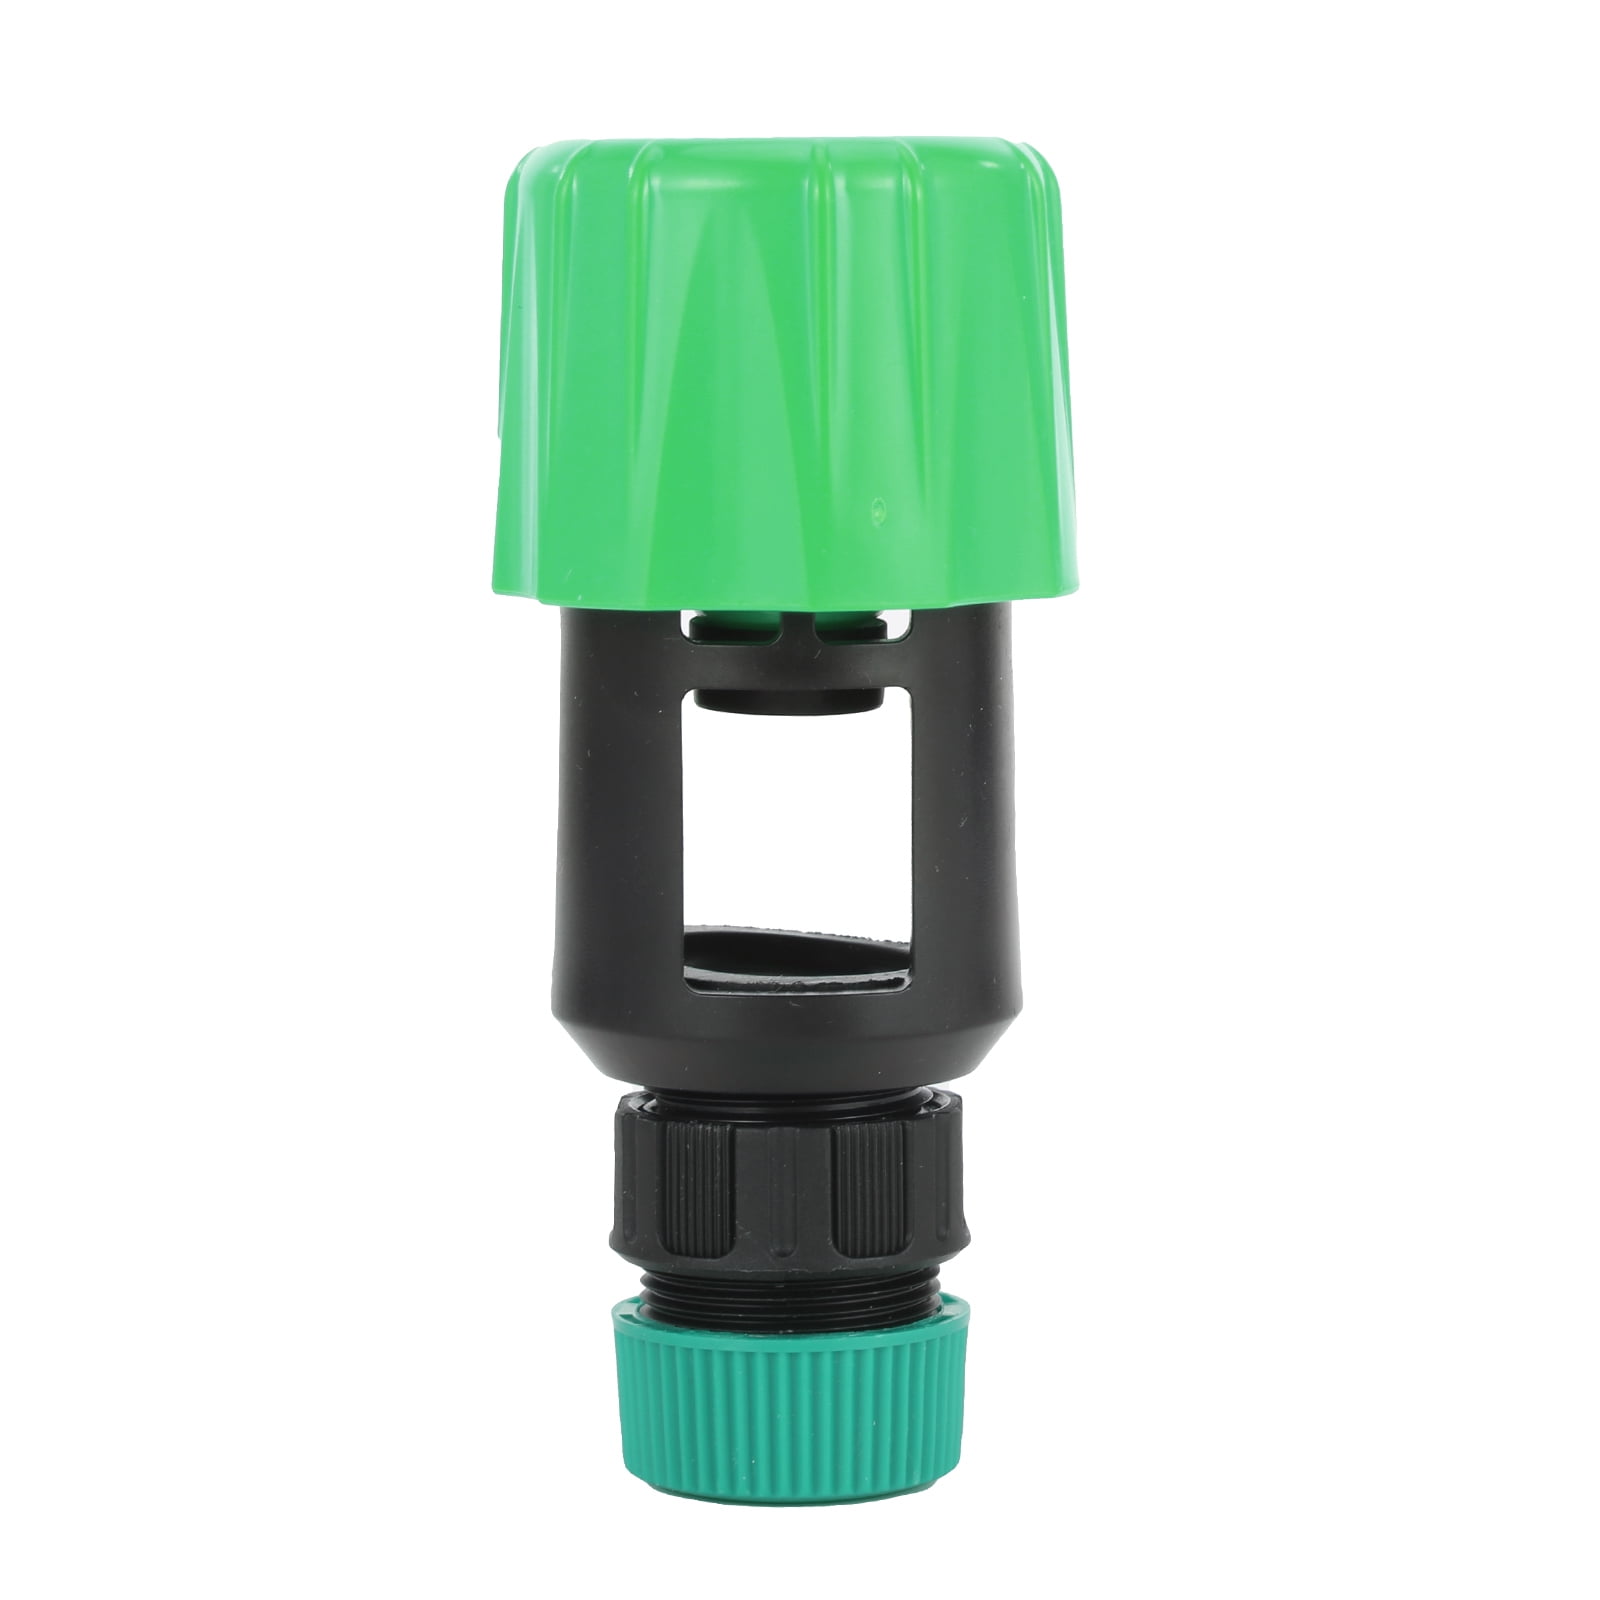 Tap Connector Adapter Mixer Garden Kitchen Hose Pipe Joiner Fitting Universal US 